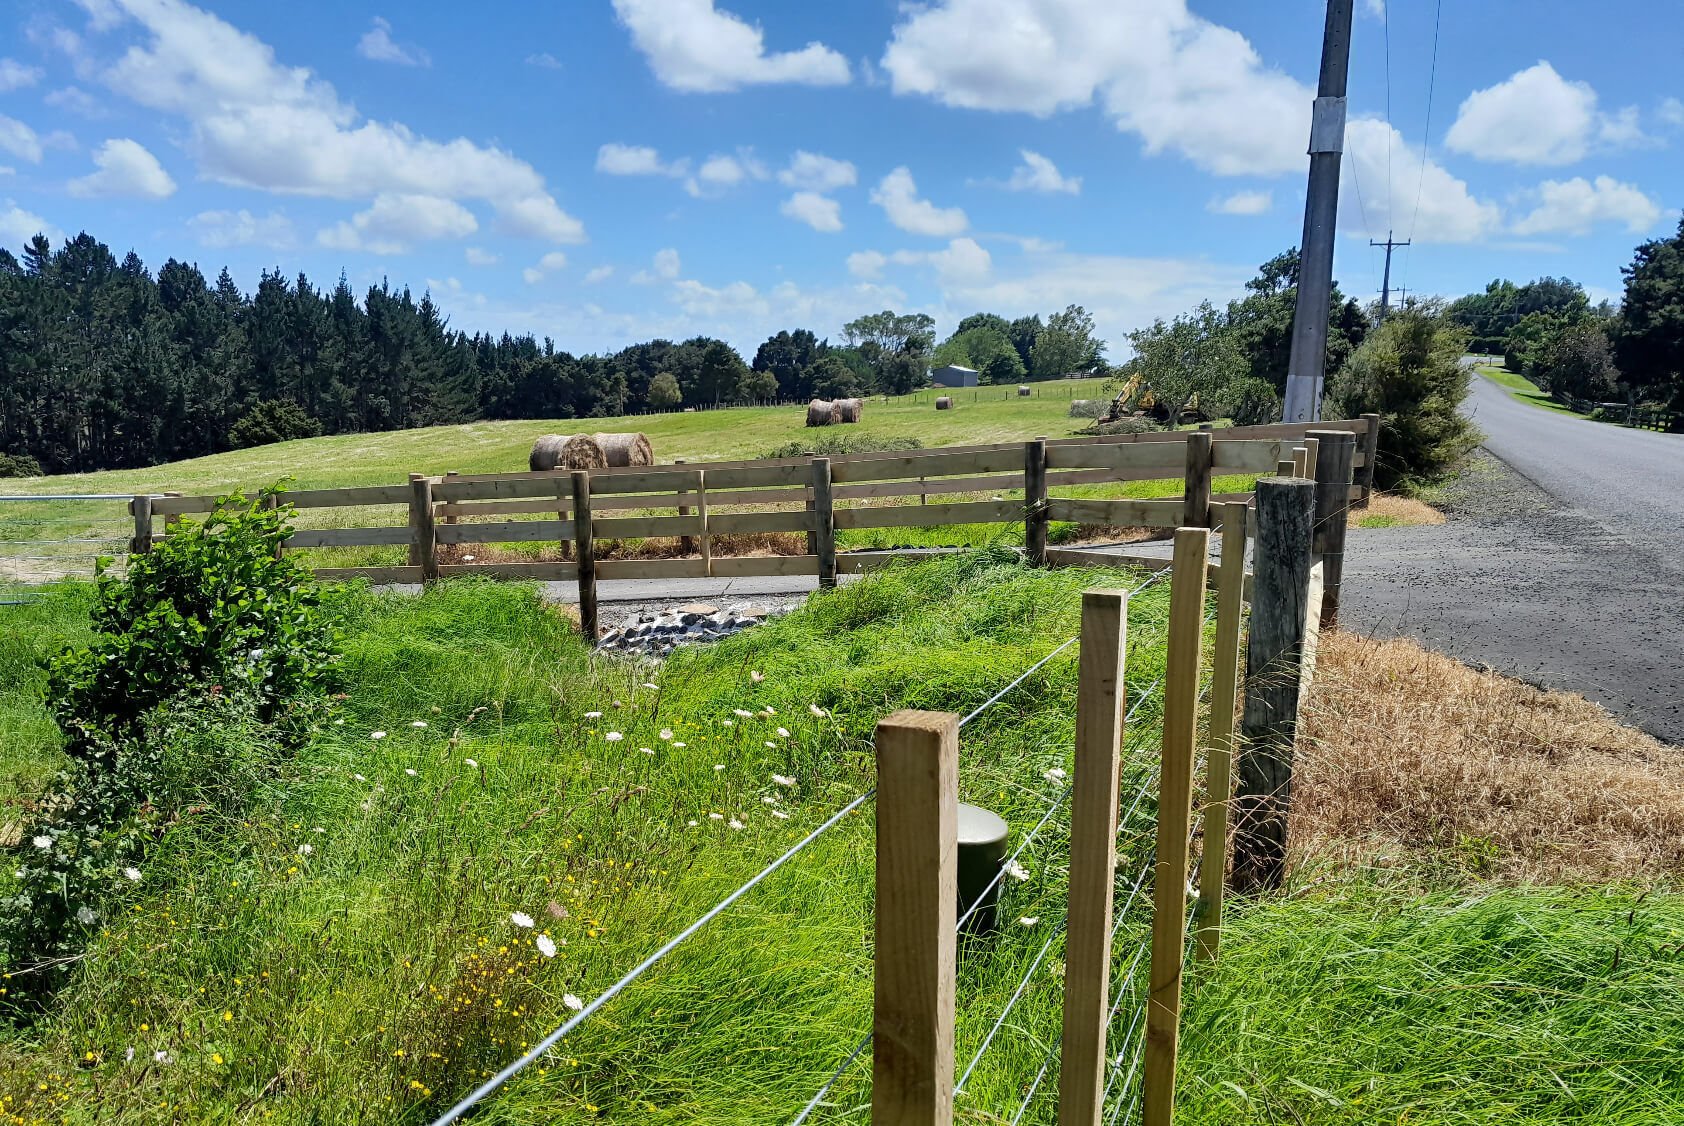 8 Lot Subdivision in Pukekohe's Countryside